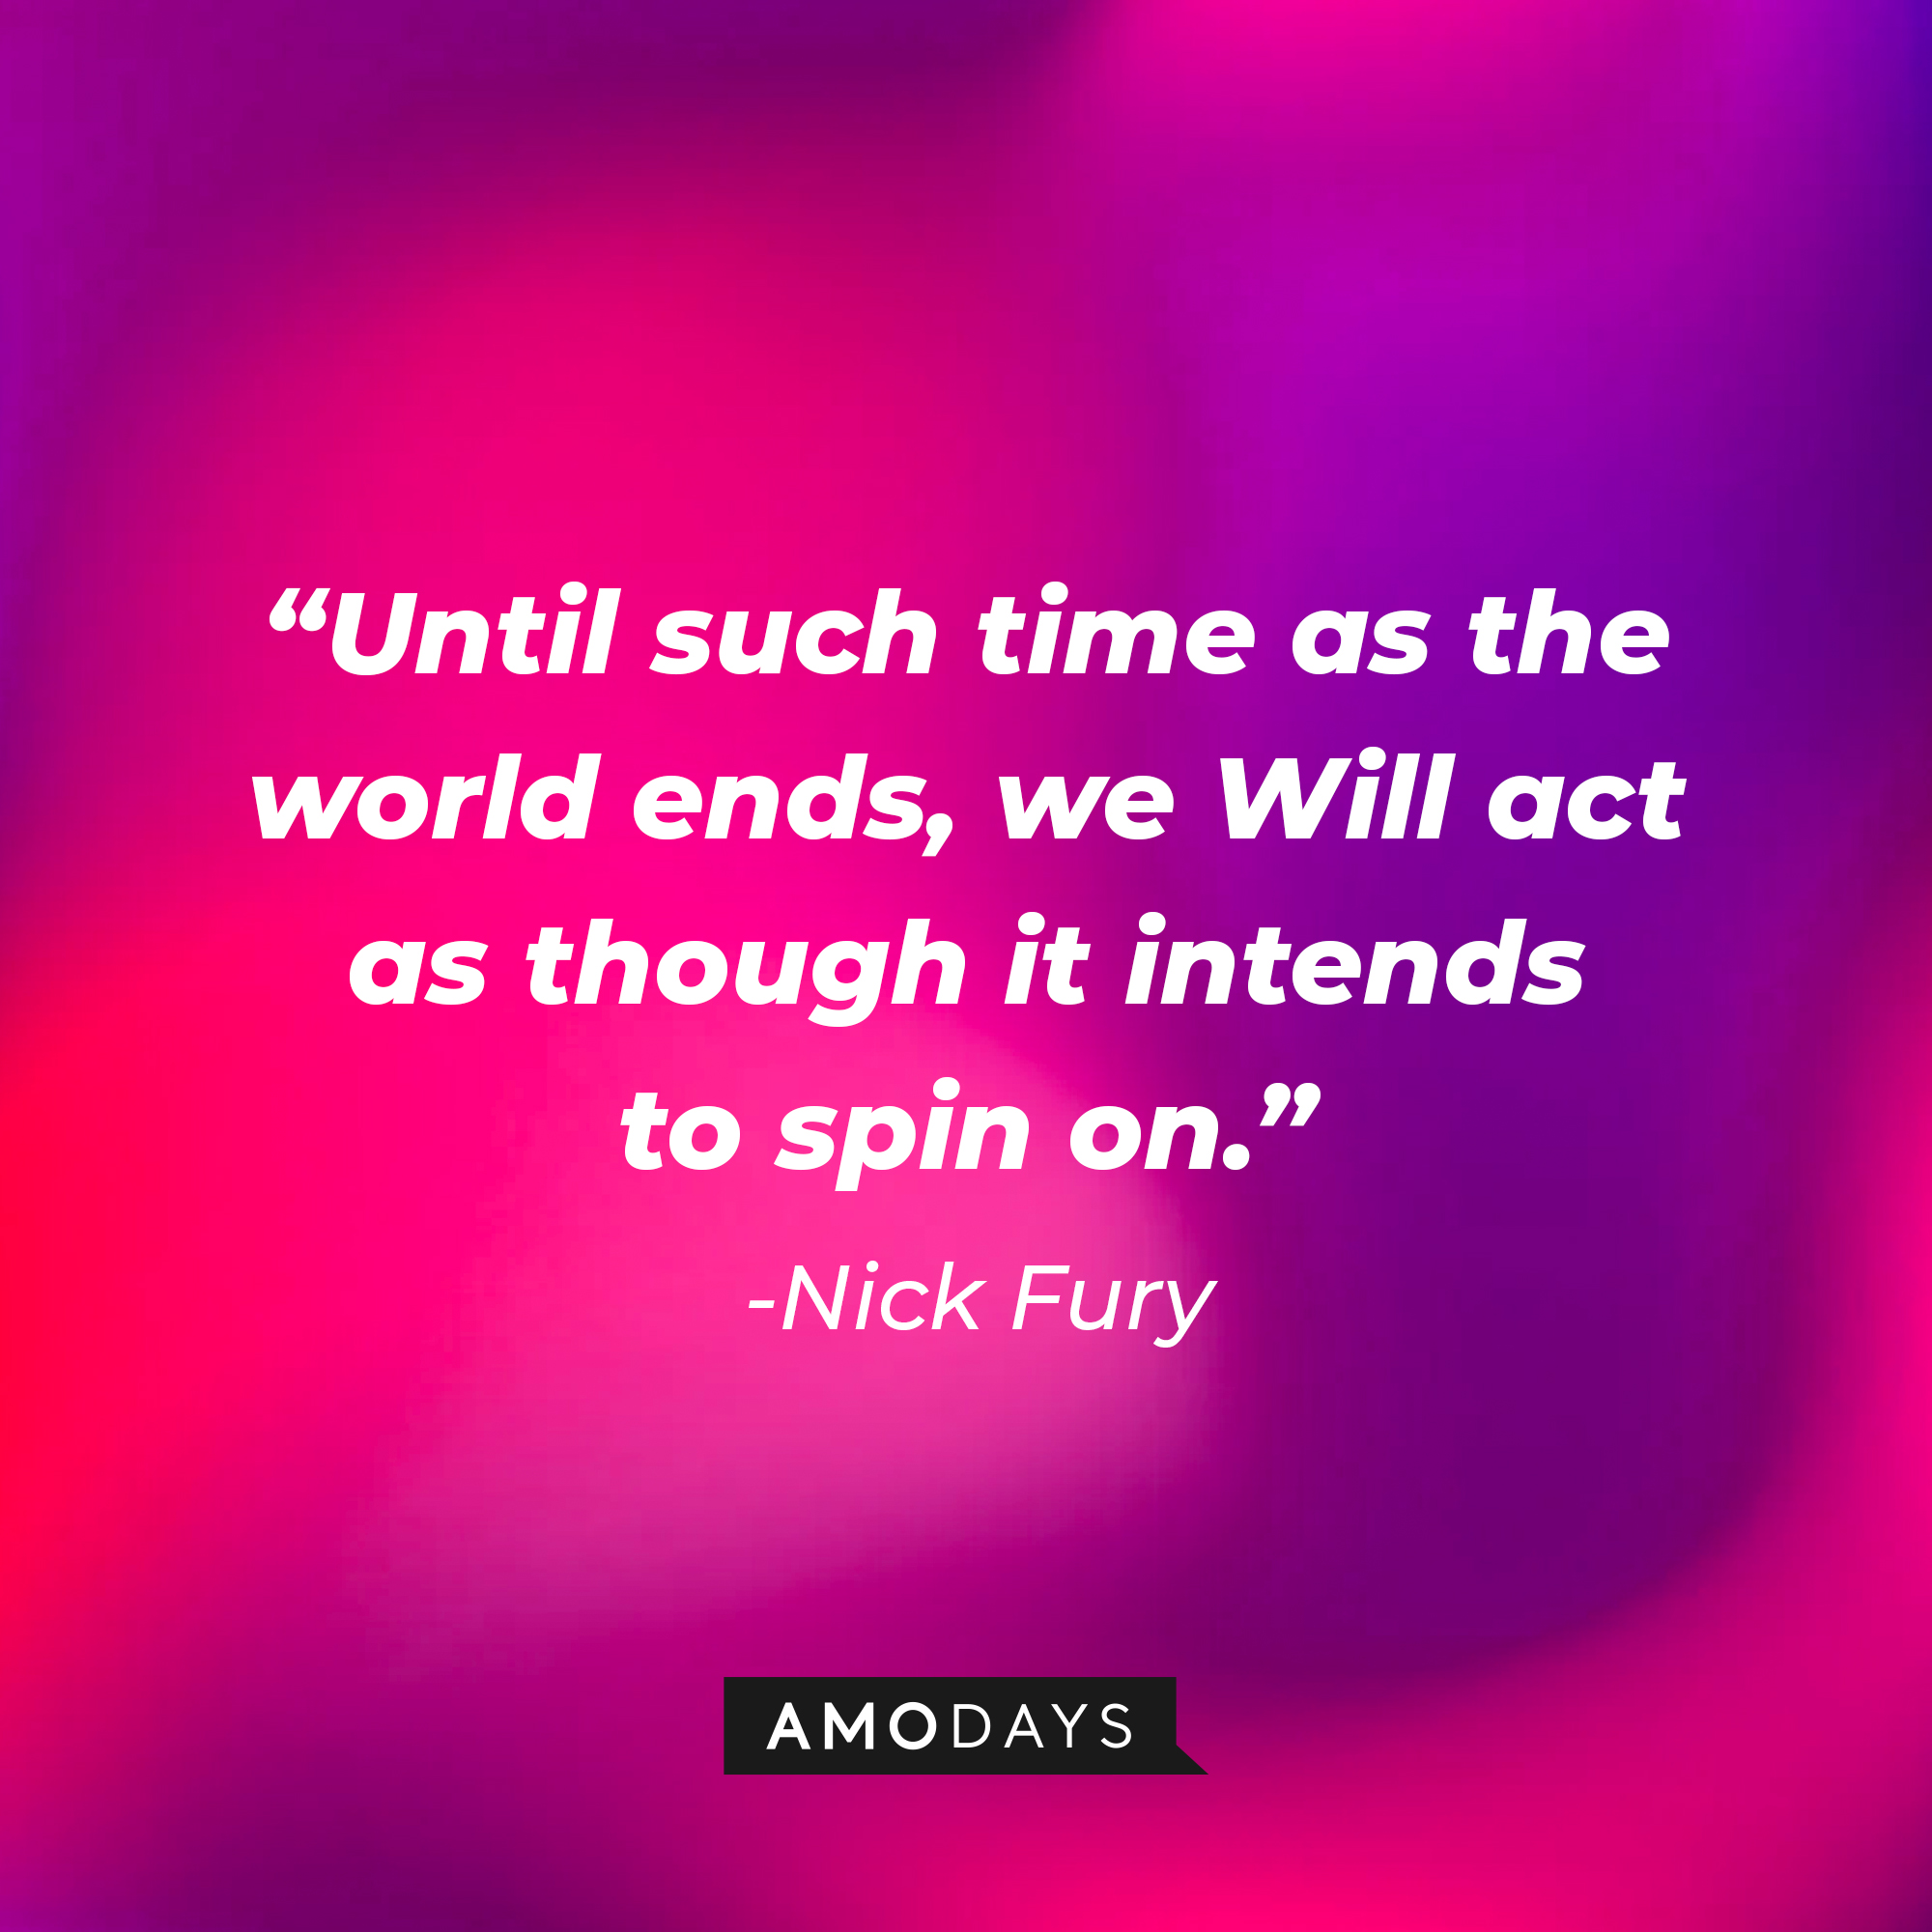 Nick Fury's quote: "Until such time as the world ends, we Will act as though it intends to spin on." | Source: AmoDays